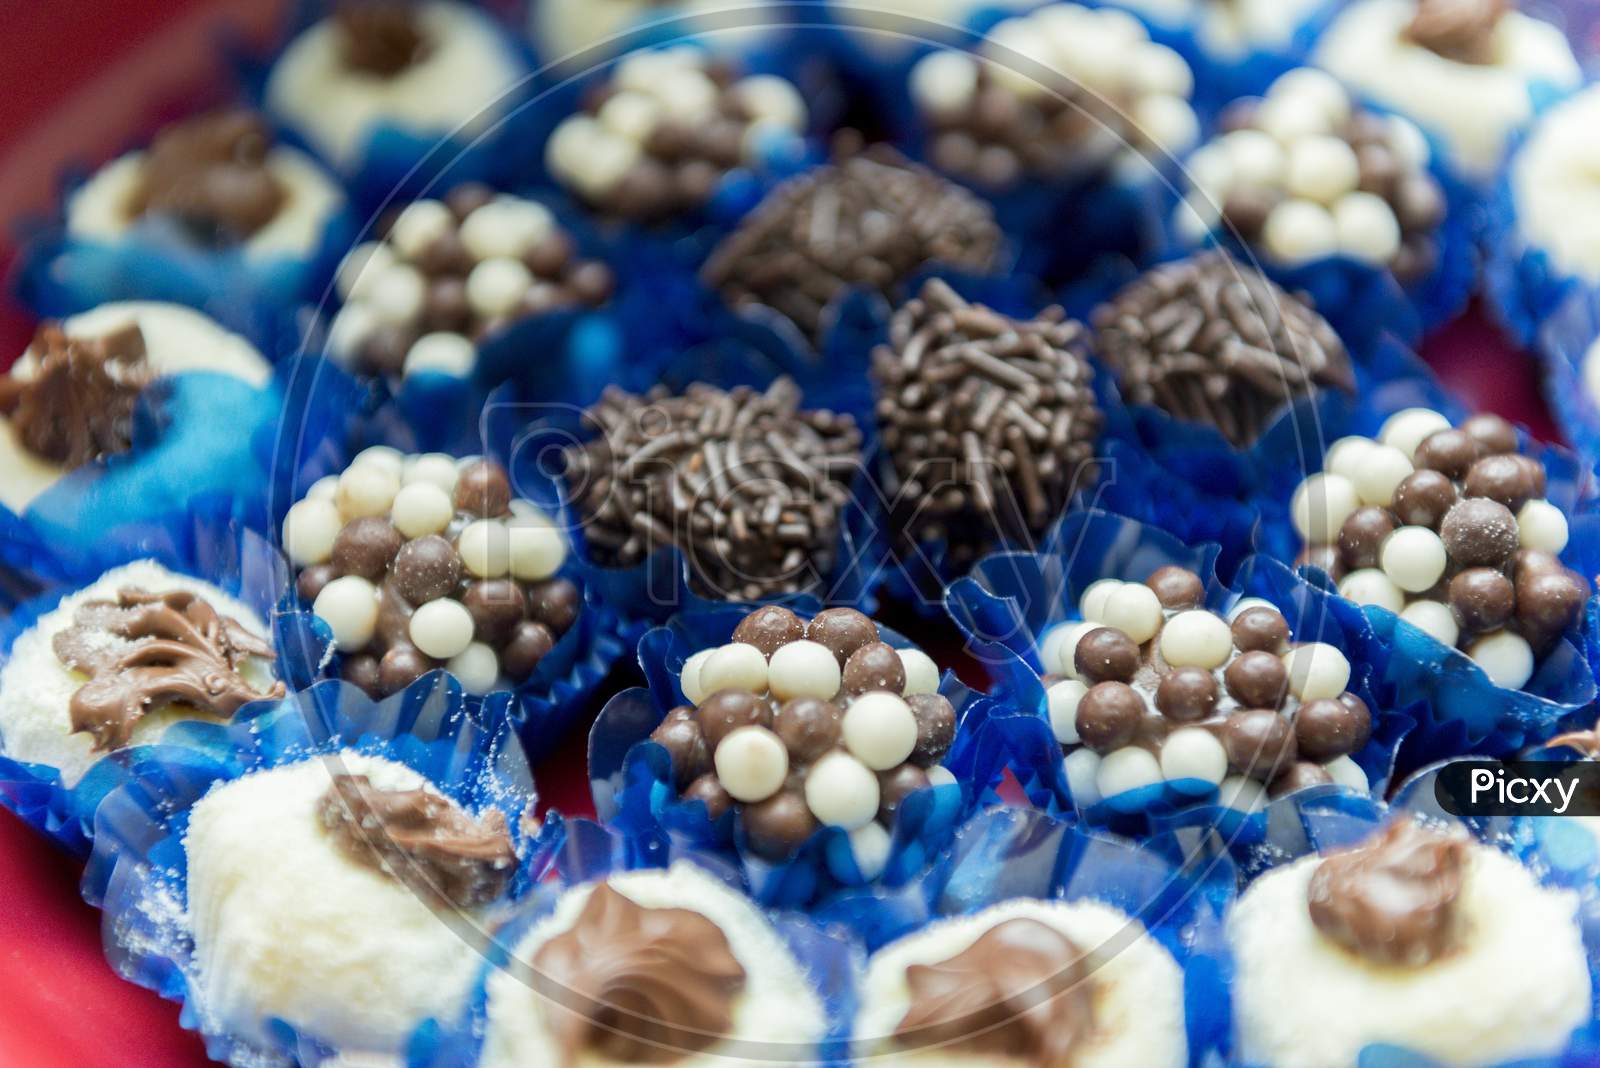 Close Up Of Delicious Candies At Party Reception.